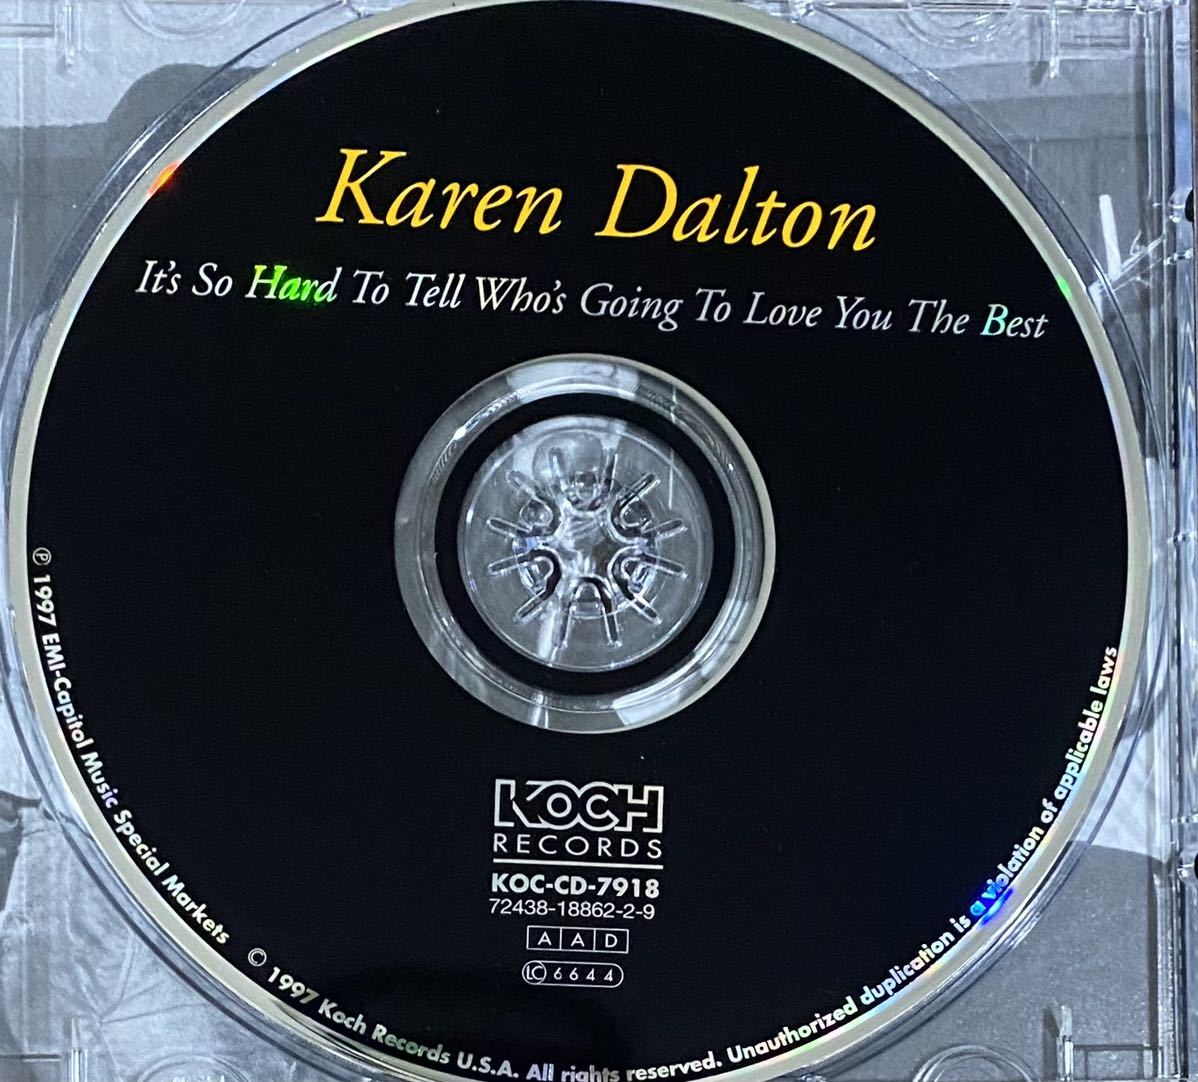 CD】Karen Dalton カレン・ダルトン■It's So Hard To Tell Who's Going To Love You The Best■アシッド・フォーク名盤